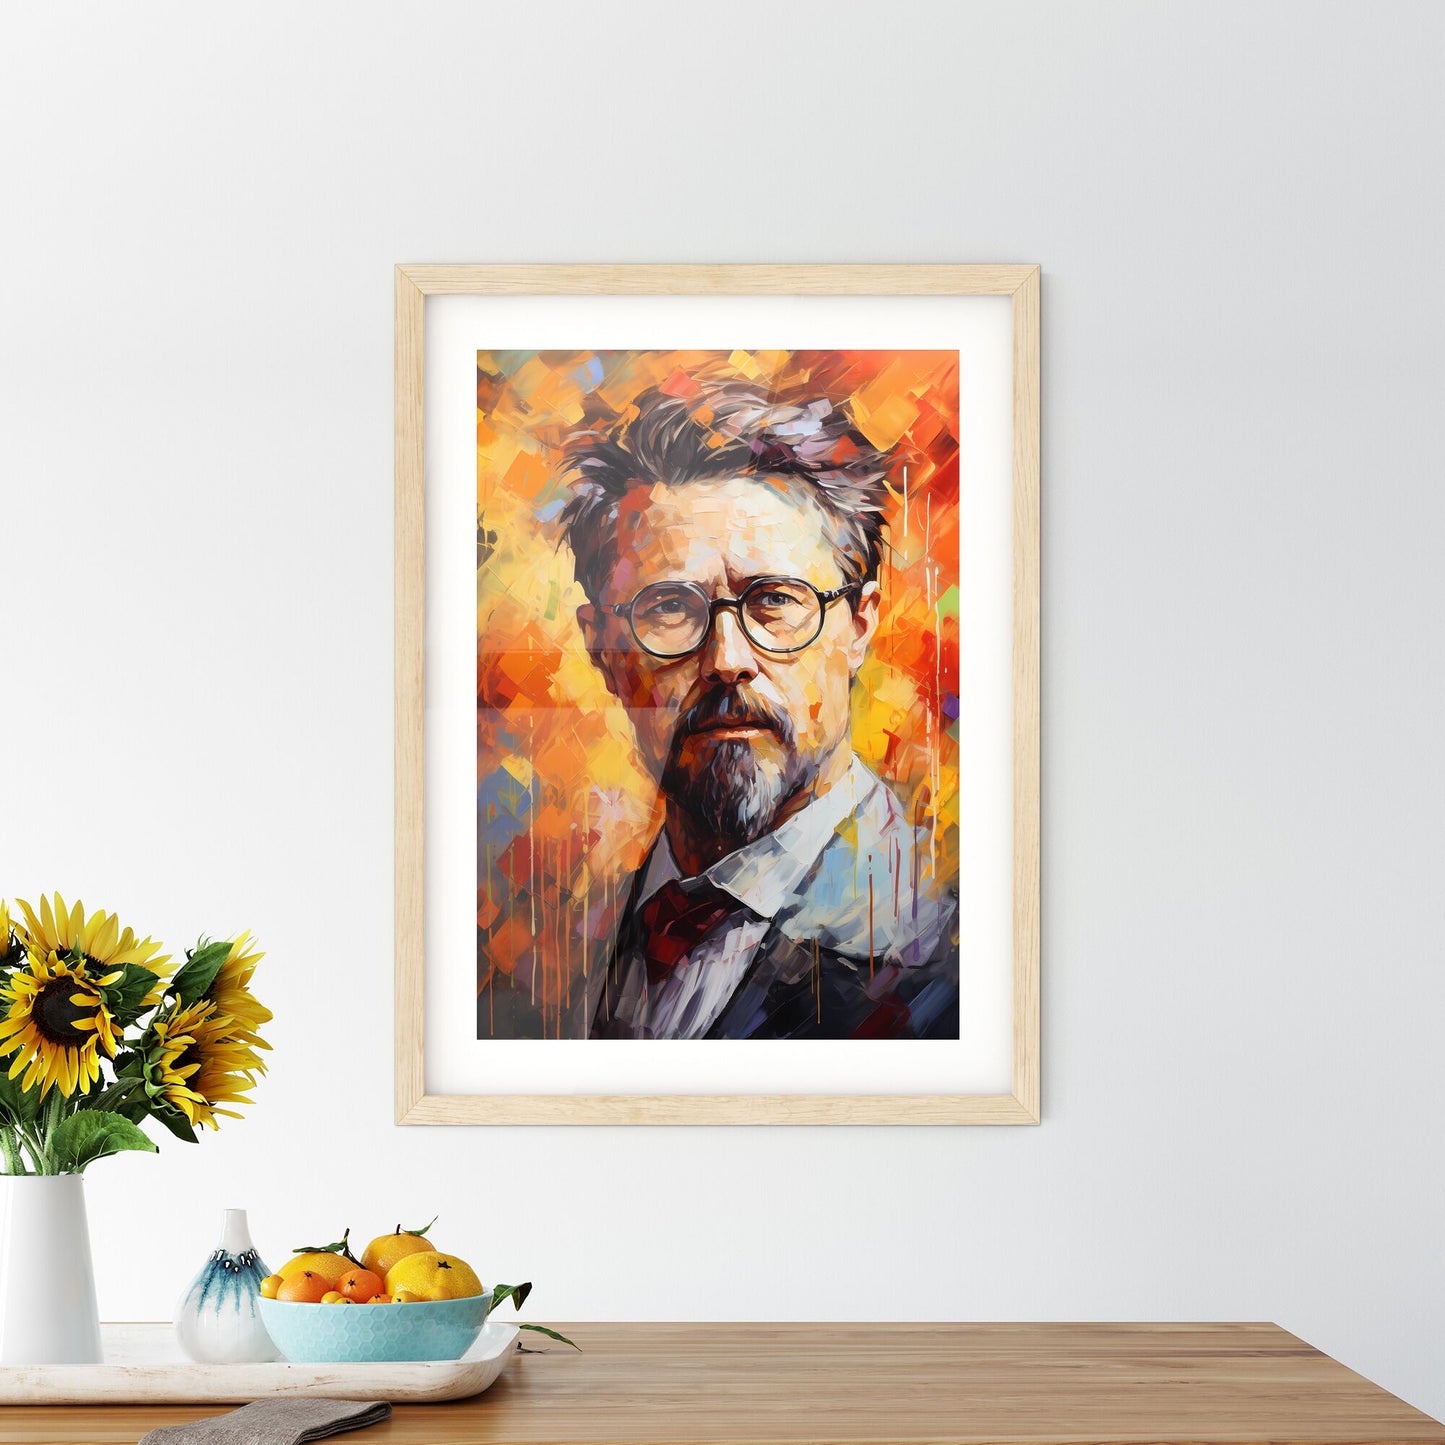 Anton Chekhov - A Painting Of A Man With Glasses Default Title